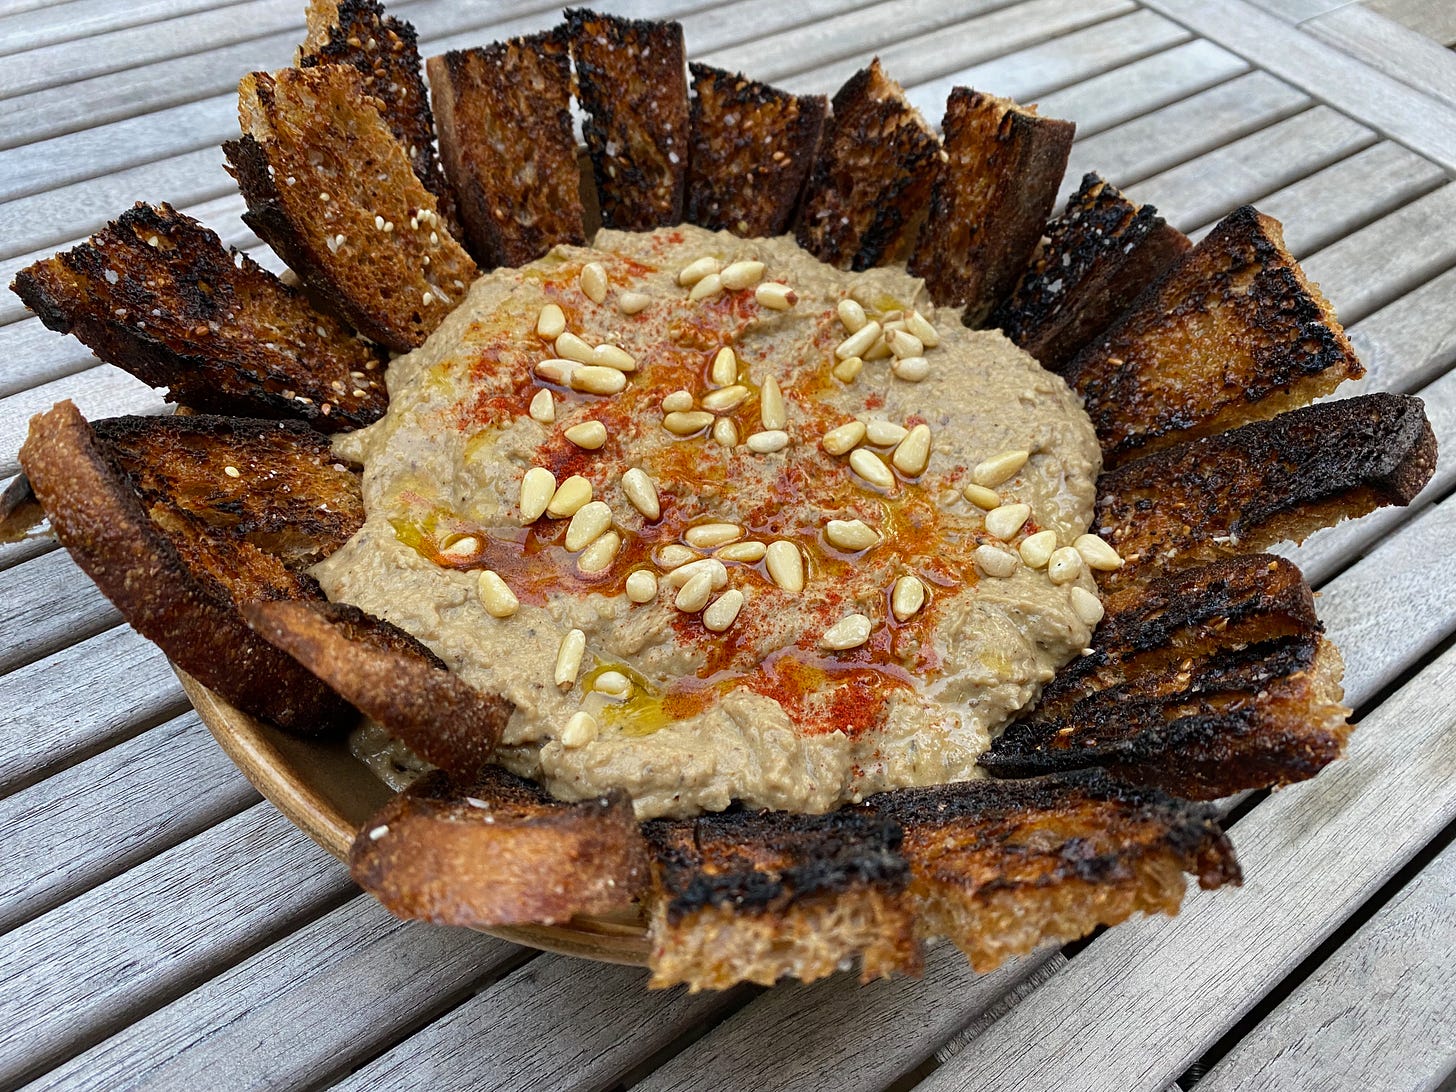 A bowl of baba ganoush topped with pine nuts and paprika, with toasty slices of bread arranged in a ring around the edges.